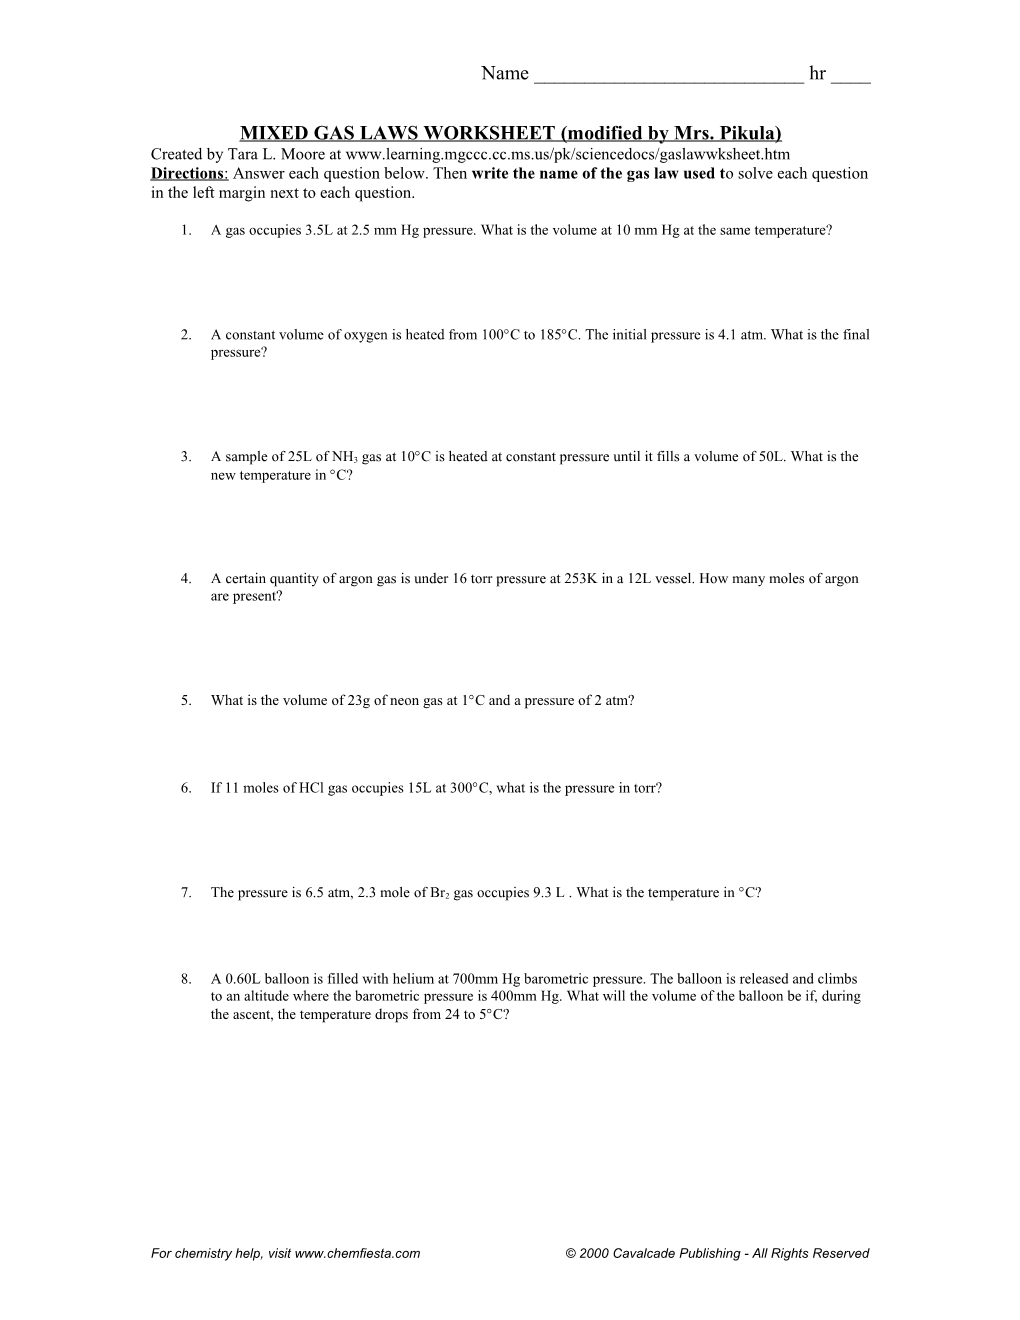 MIXED GAS LAWS WORKSHEET (Modified by Mrs